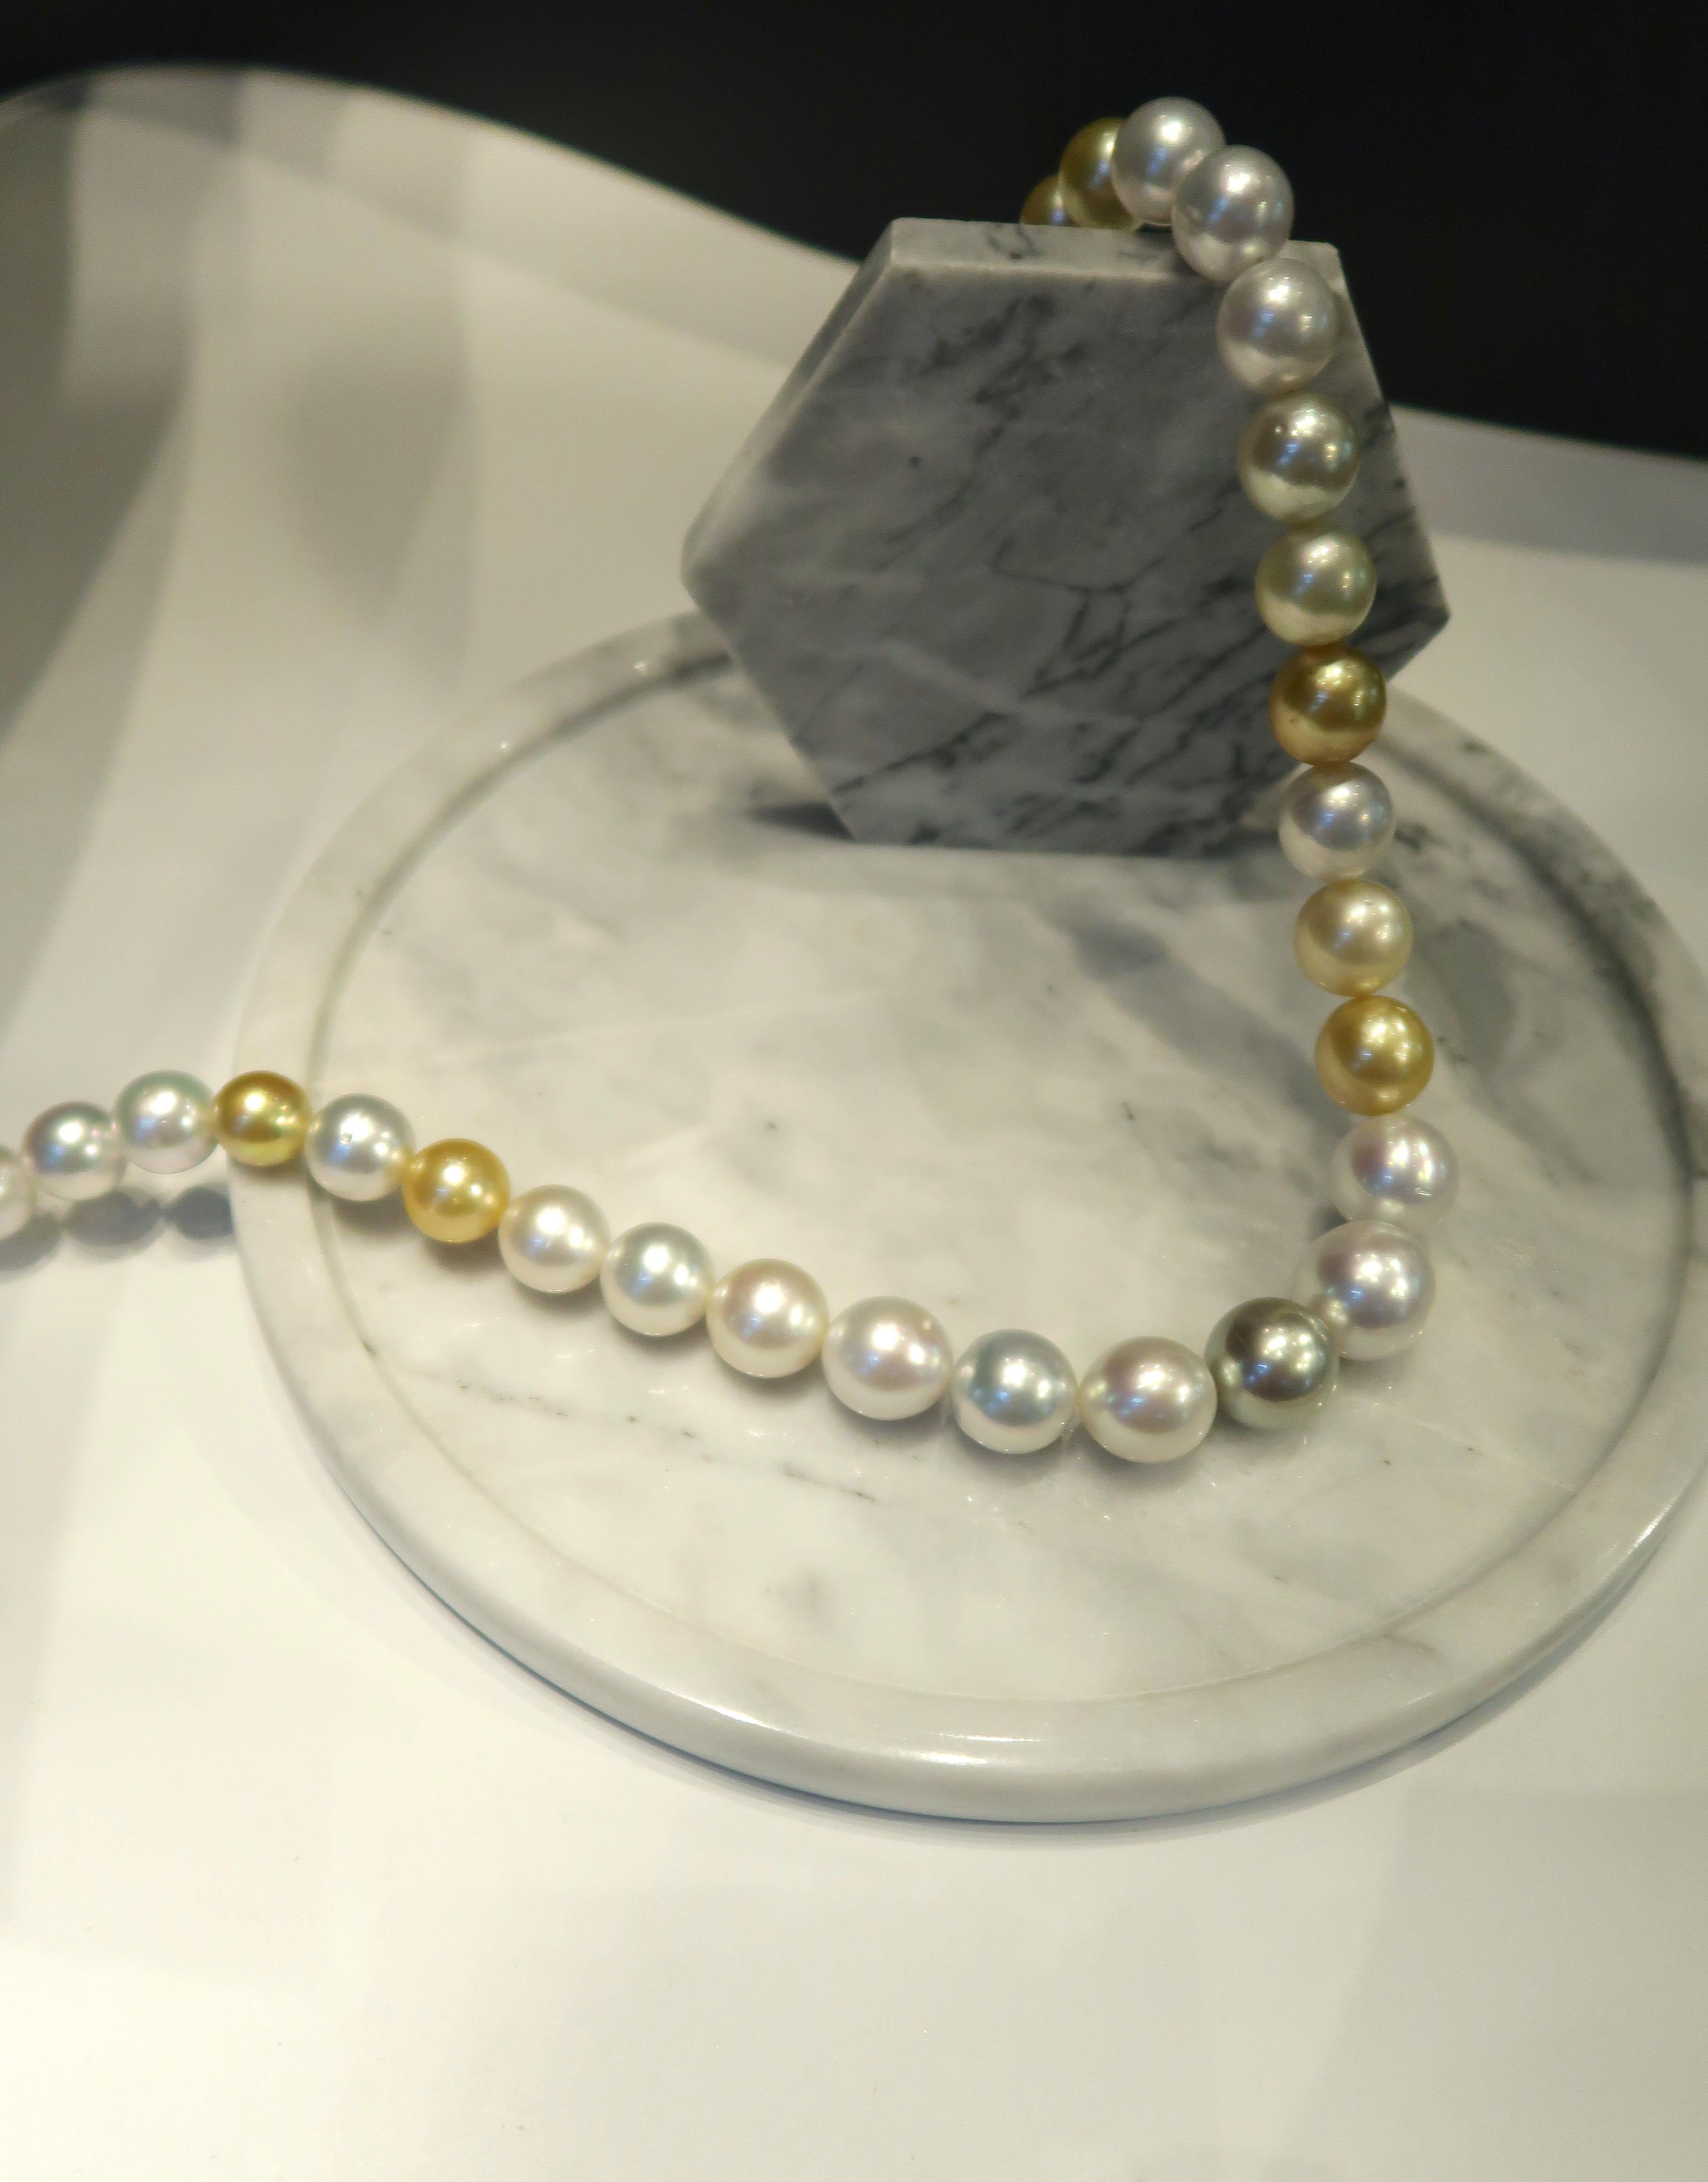 Prominent Lustrous Multicolour South Sea Pearl Necklace in a Variety of Shades between Silvery White and Deep Gold.

Can be stacked with LU820312764512.

Pearl: 30 pieces, Shades of Silvery White and Deep Gold South Sea, 12-16.6 mm
Length: 16